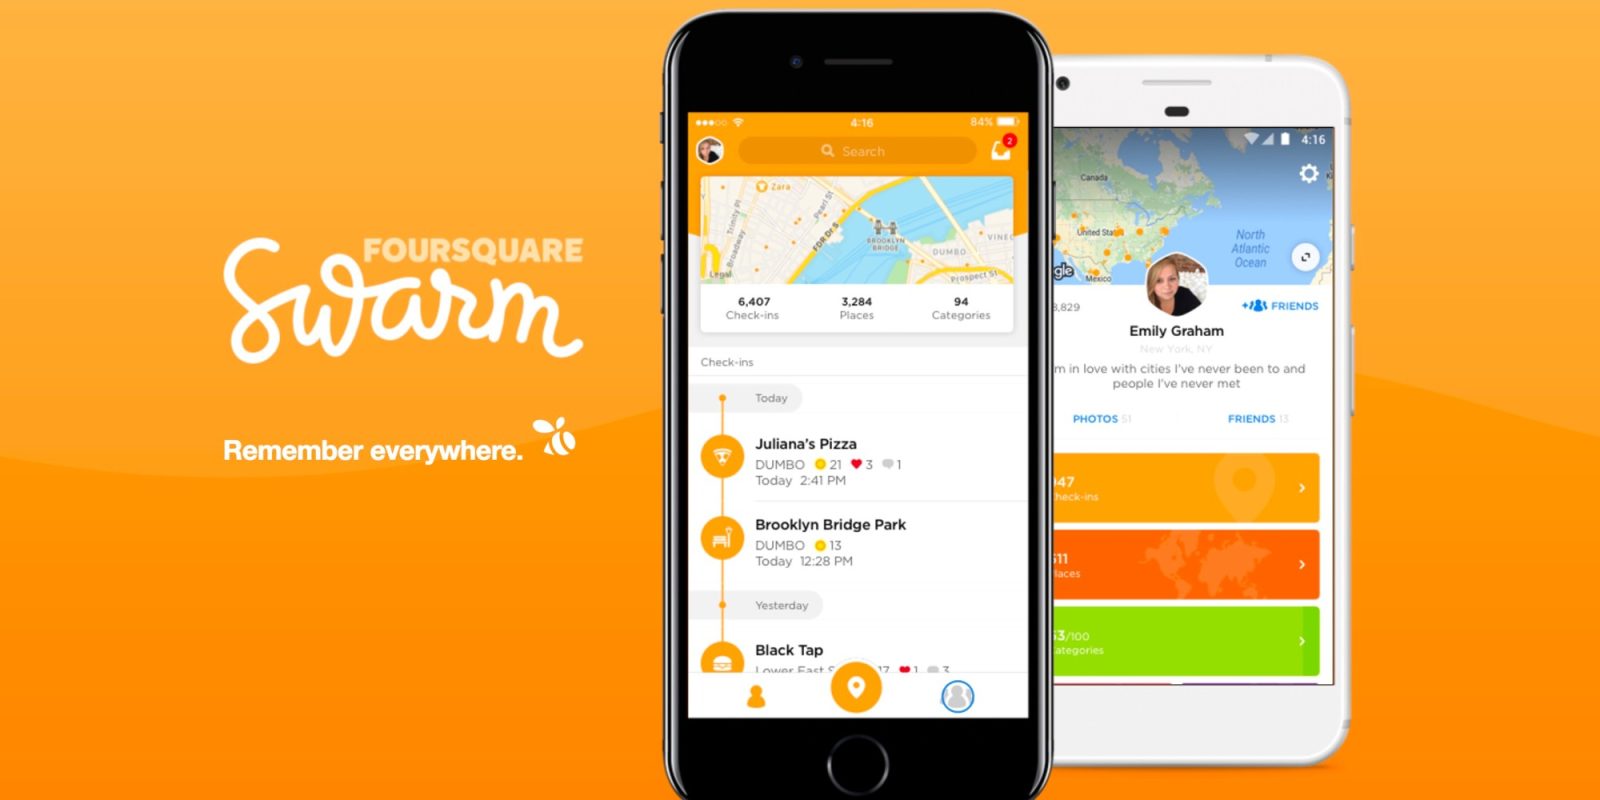 Foursquare's Swarm 5.0 on iOS and Android